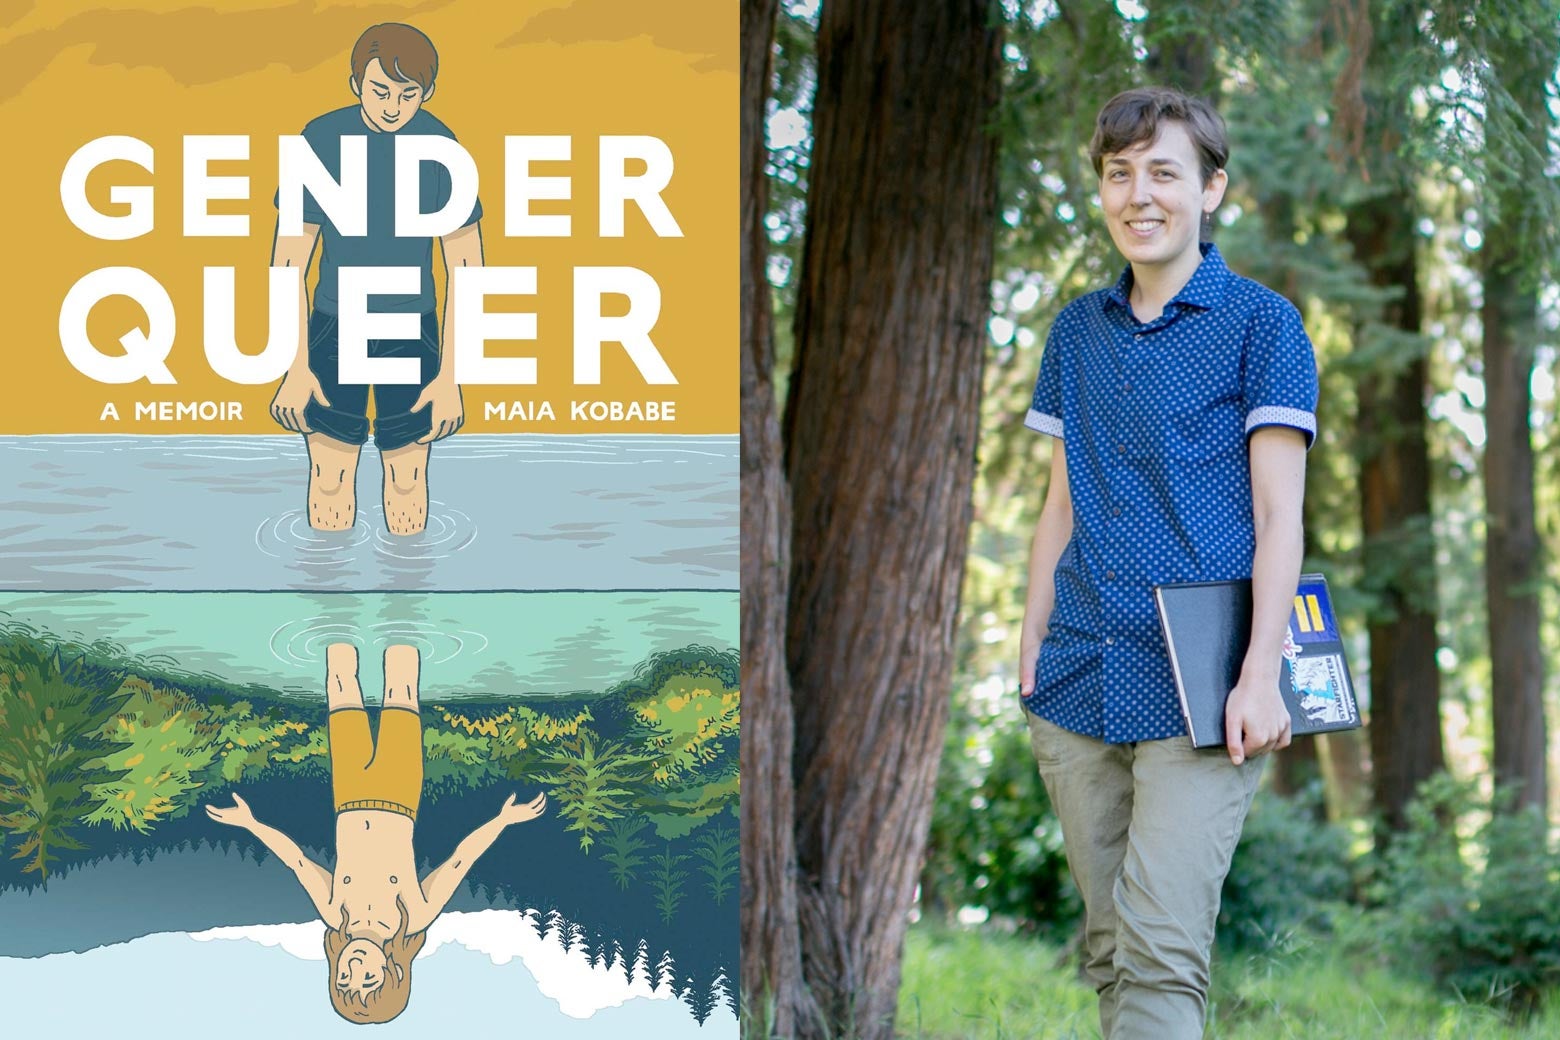 The book cover includes a drawing of, on the top, a person wading in fresh water with hair on their legs and a T-shirt on. On the bottom of the cover, a sort of mirror image, with a young person with long hair and no shirt. Then to the right, a photo of Maia Kobabe, in long pants, medium-length hair, and a short sleeve blue button down.